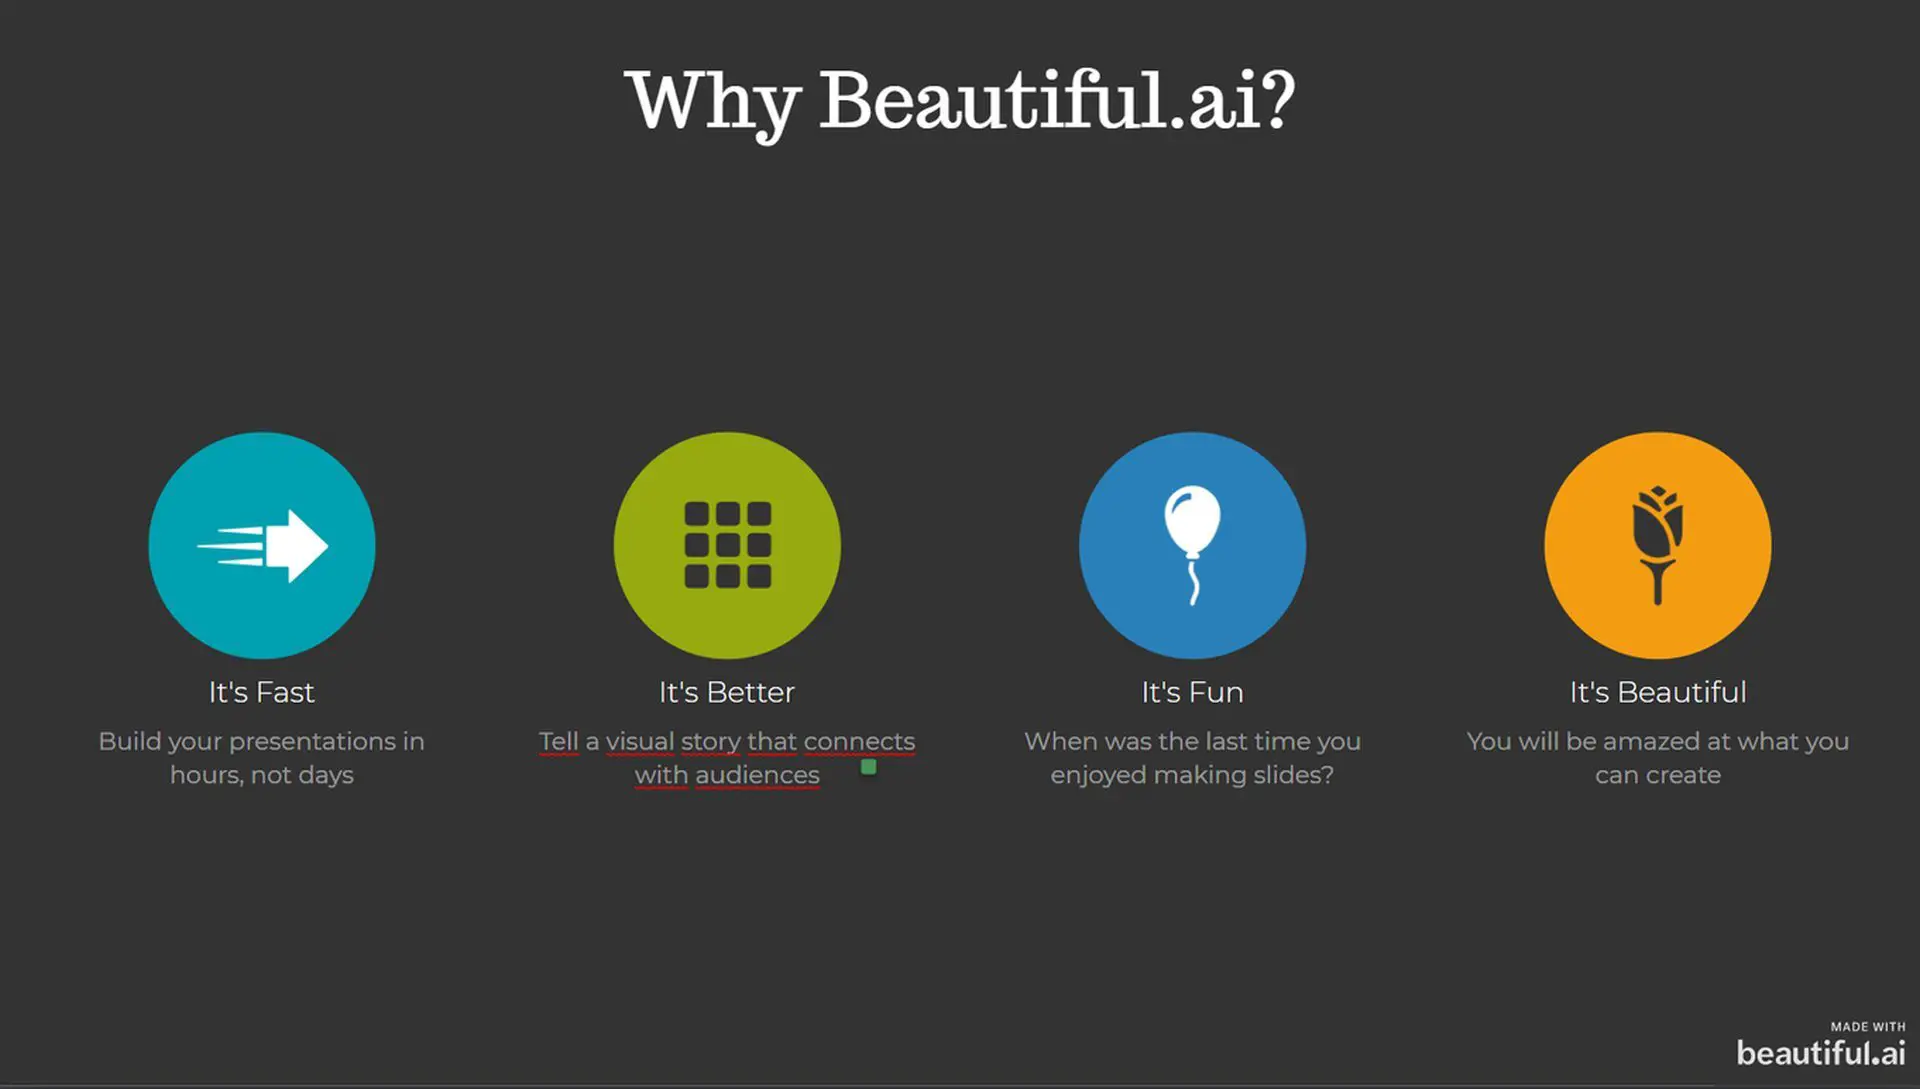 What is Beautiful.ai? Learn how to use Beautiful.ai and find out its templates, AI-powered features (DesignerBot), and more for creating presentations.